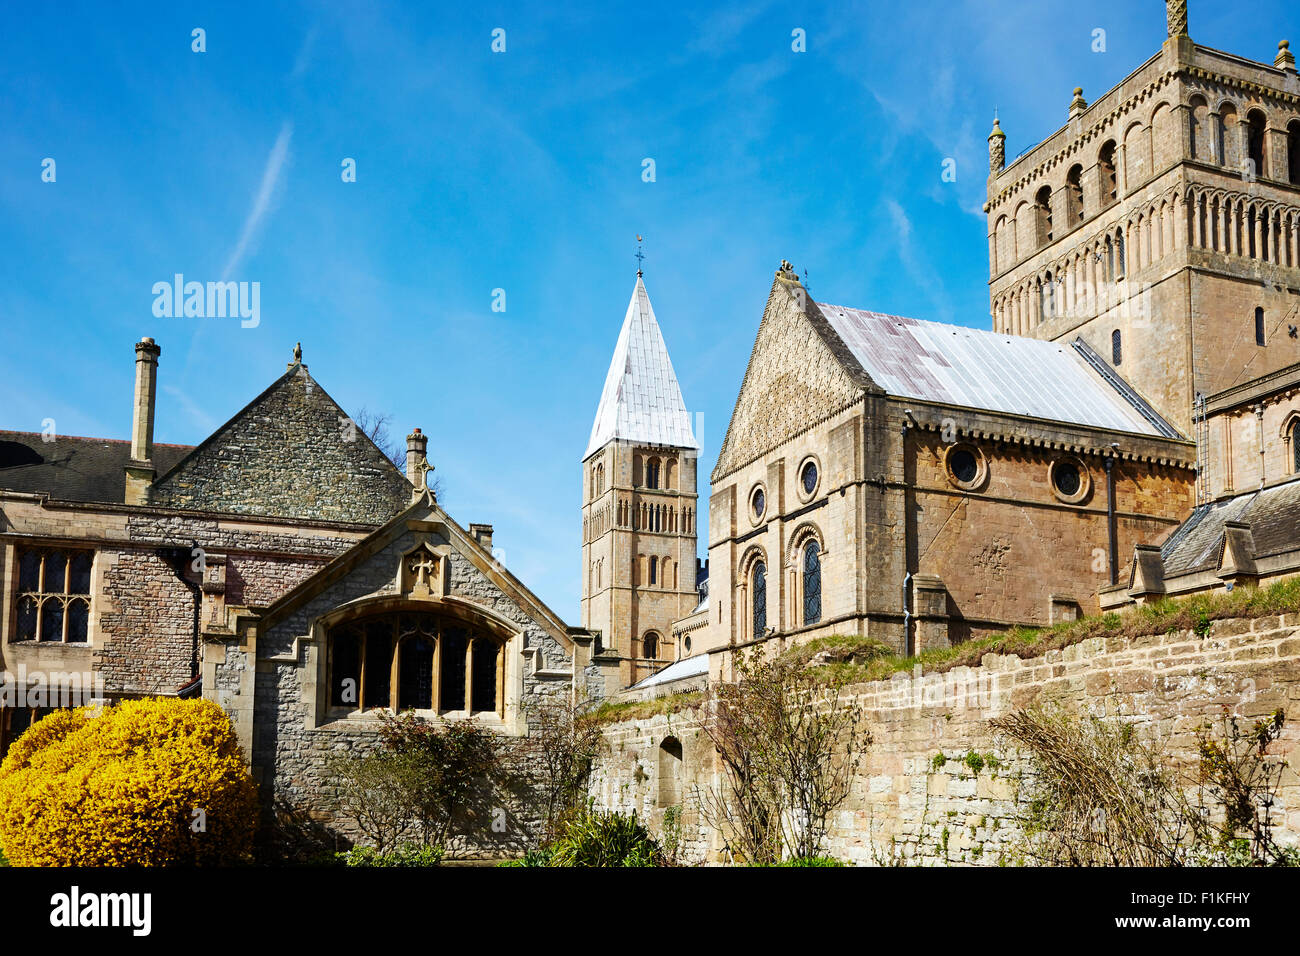 View of The Minster and Archbishop's Palace in Southwell, Nottinghamshire, England, UK. Stock Photo